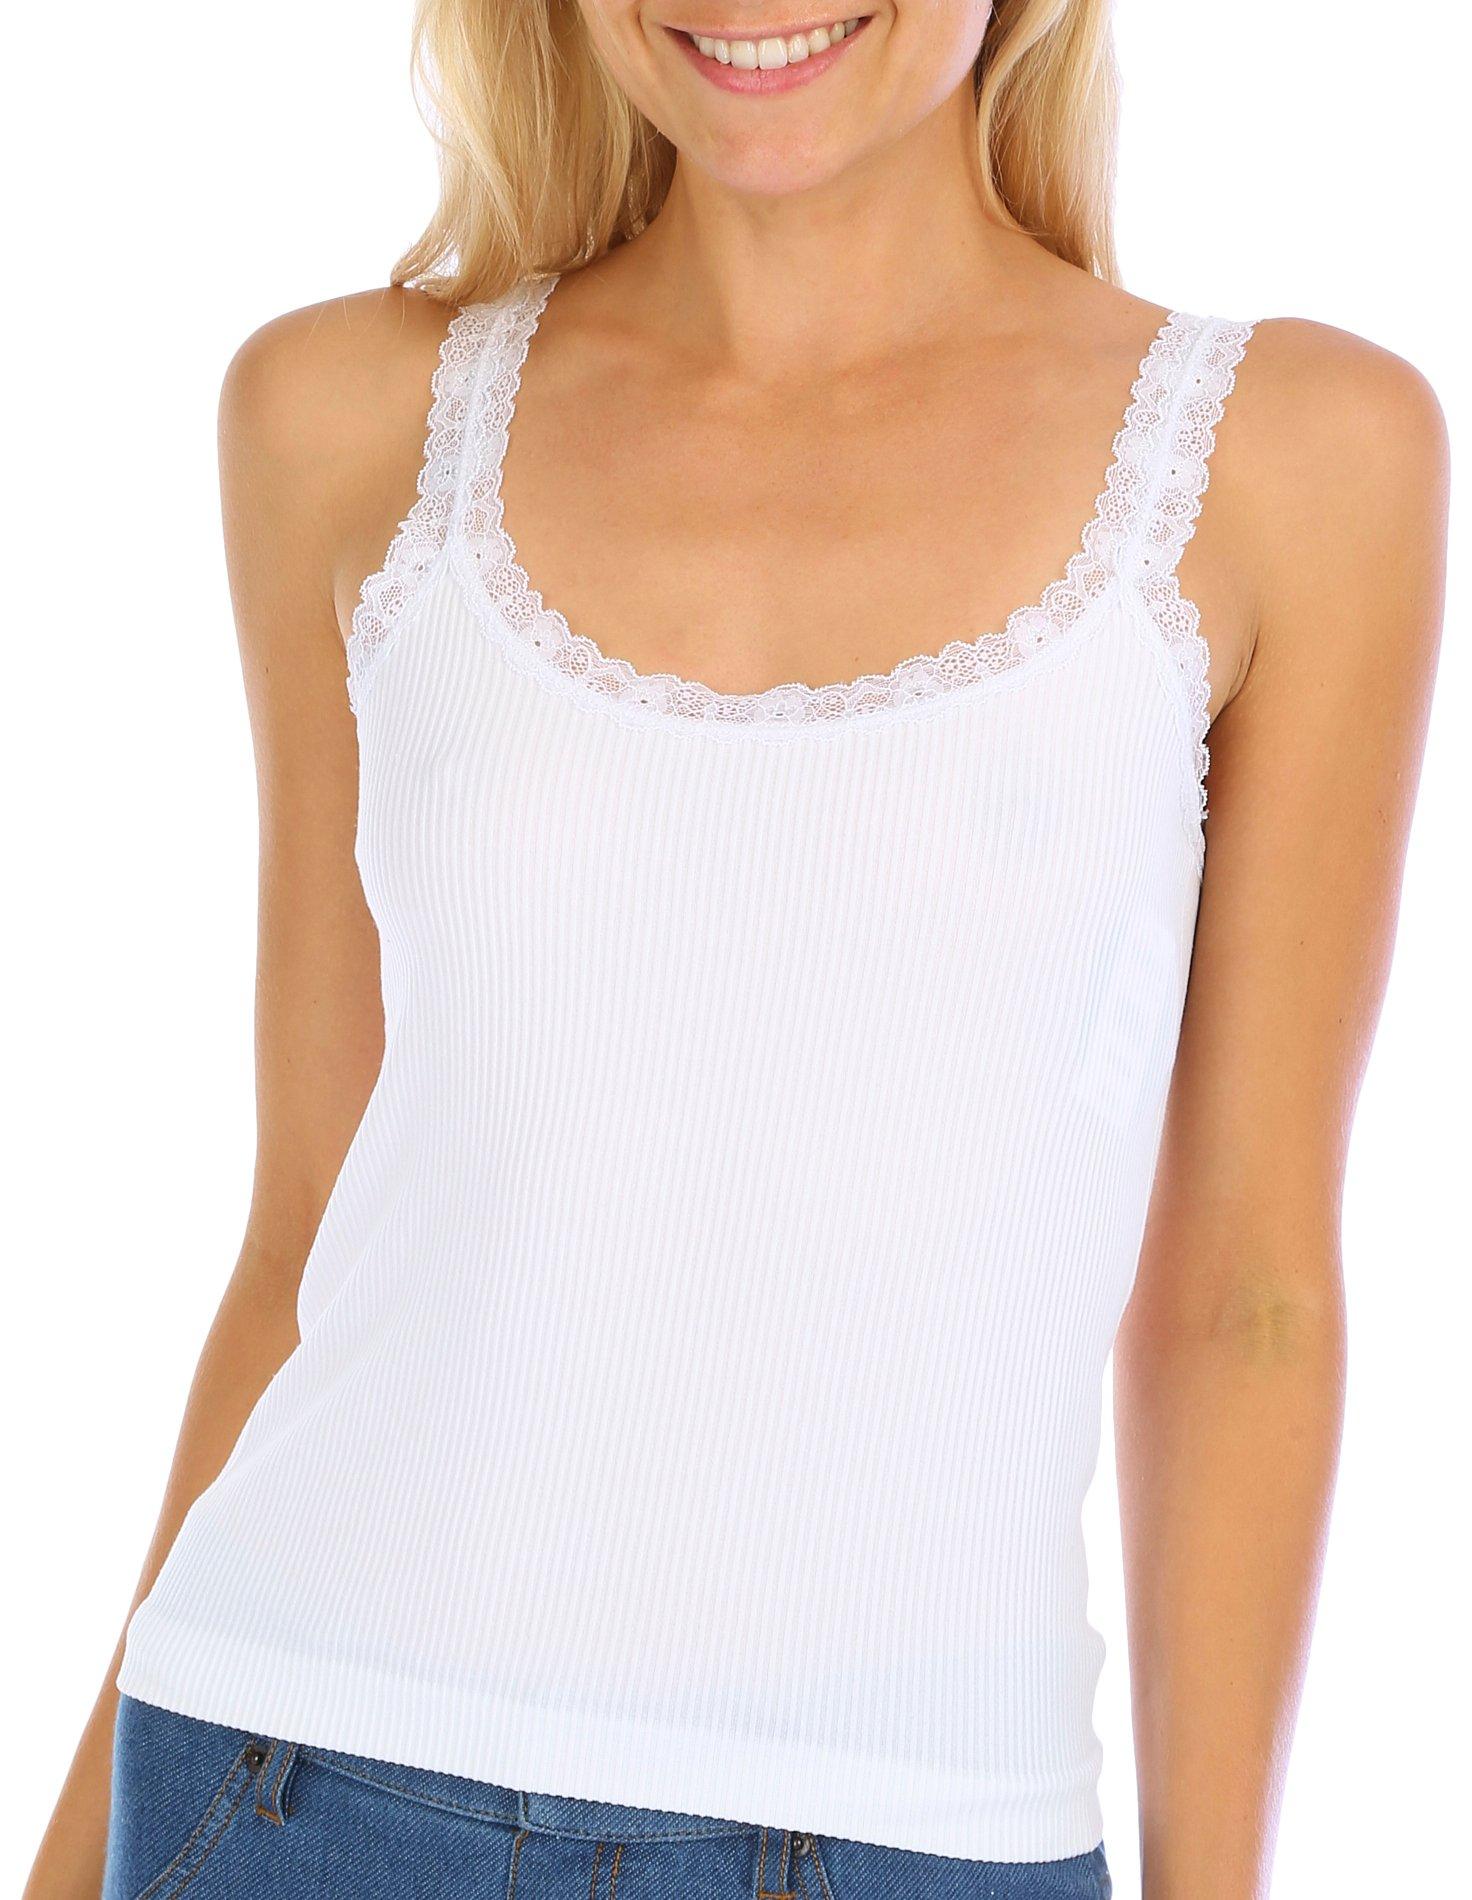 Full Circle Trends Solid Micro Ribbed Lace Cami